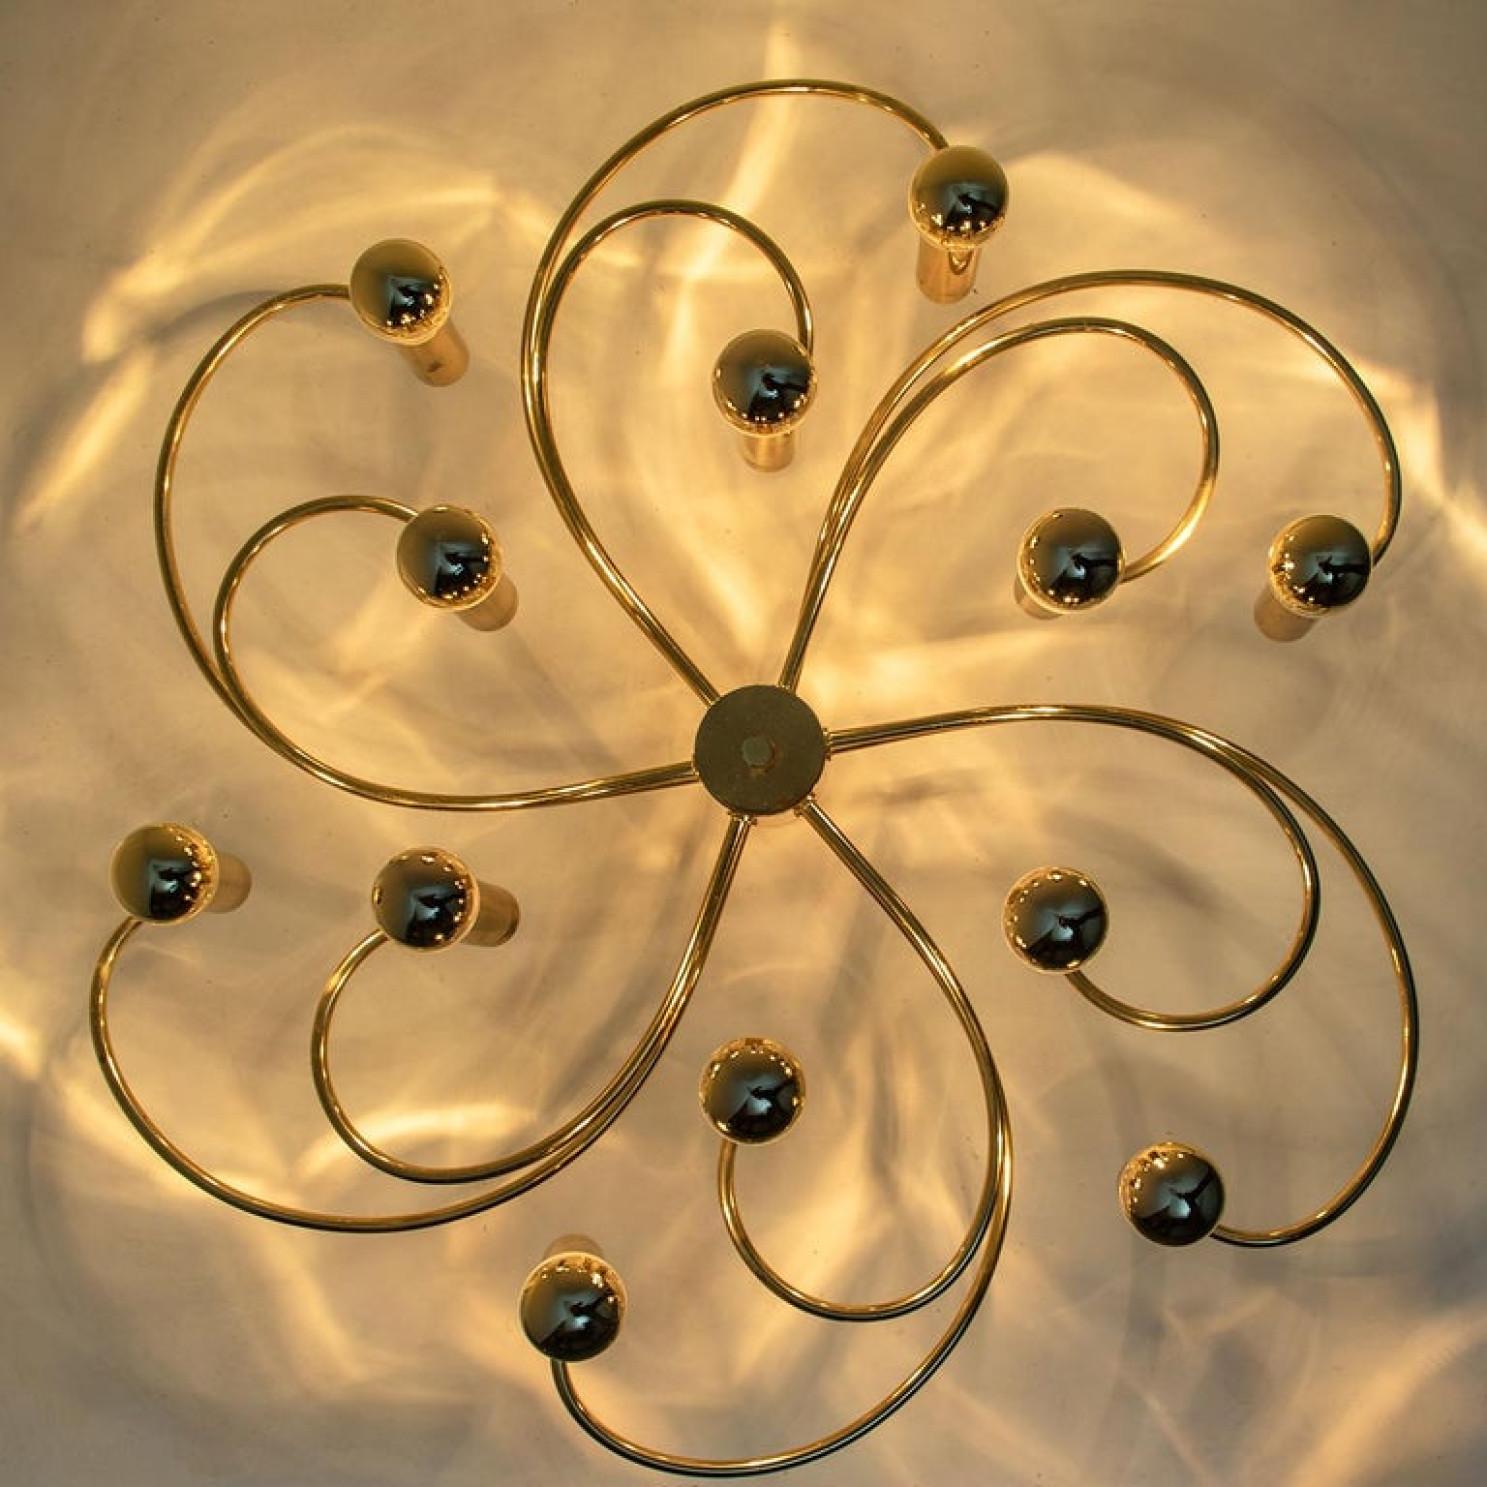 1 of the 2 Leola Sculptural Brass 13-Light Ceiling or Wall Flush Mount, 1970s For Sale 3